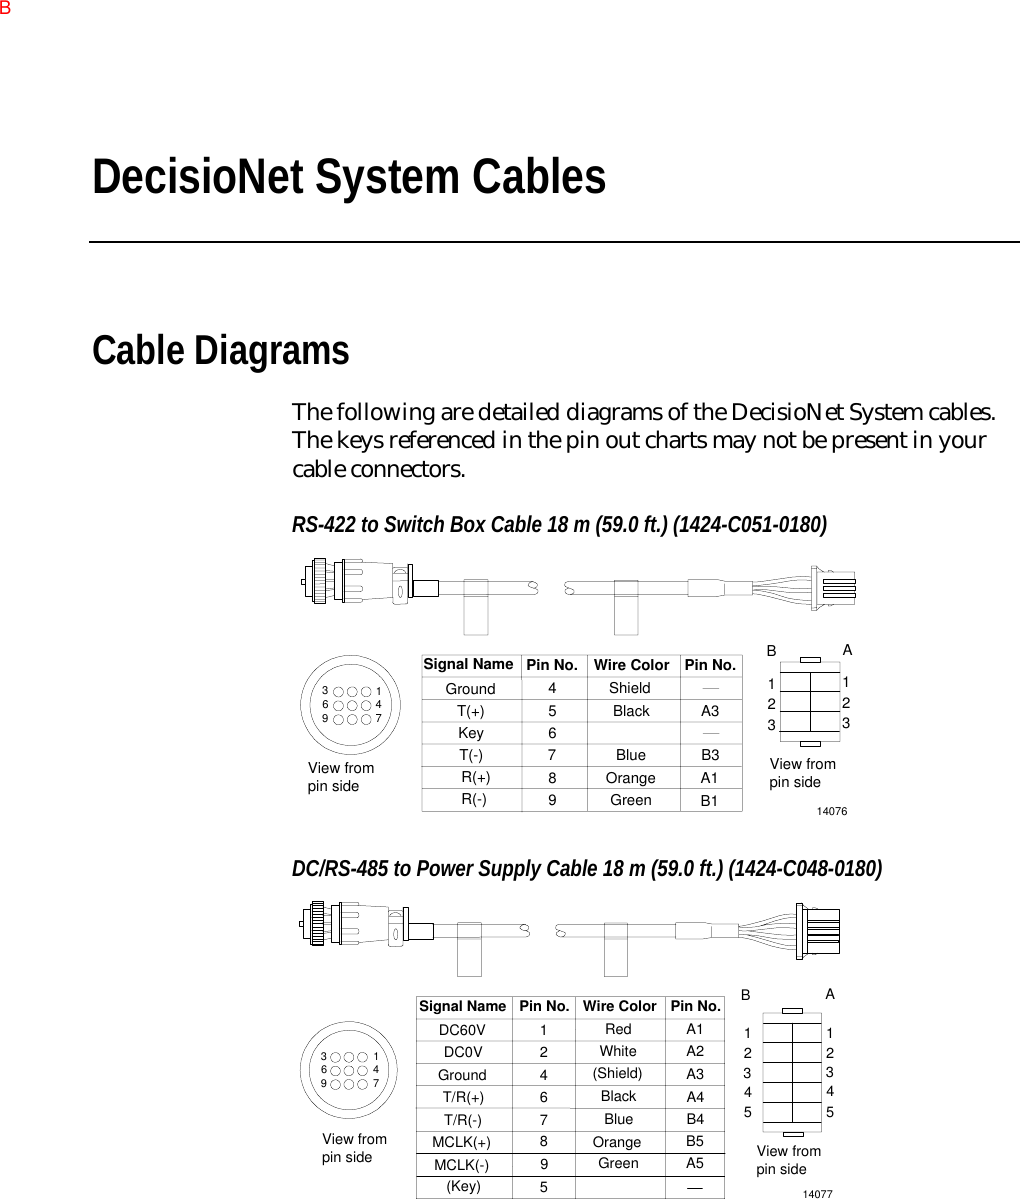 DecisioNet System CablesCable DiagramsThe following are detailed diagrams of the DecisioNet System cables.The keys referenced in the pin out charts may not be present in yourcable connectors.RS-422 to Switch Box Cable 18 m (59.0 ft.) (1424-C051-0180)14076147369AB123123GroundT(+)KeyT(-)R(+)R(-)456789ShieldBlackBlueOrangeGreenA3B3A1B1Signal Name Pin No. Wire Color Pin No.View frompin sideView frompin sideDC/RS-485 to Power Supply Cable 18 m (59.0 ft.) (1424-C048-0180)14077View frompin sideAB1234512345Pin No. Wire Color Pin No.Signal NameDC60VDC0VGroundT/R(+)T/R(-)MCLK(+)MCLK(-)(Key)12467895RedWhite(Shield)BlackBlueOrangeGreenA1A2A3A4B4B5A5147369View frompin sideB